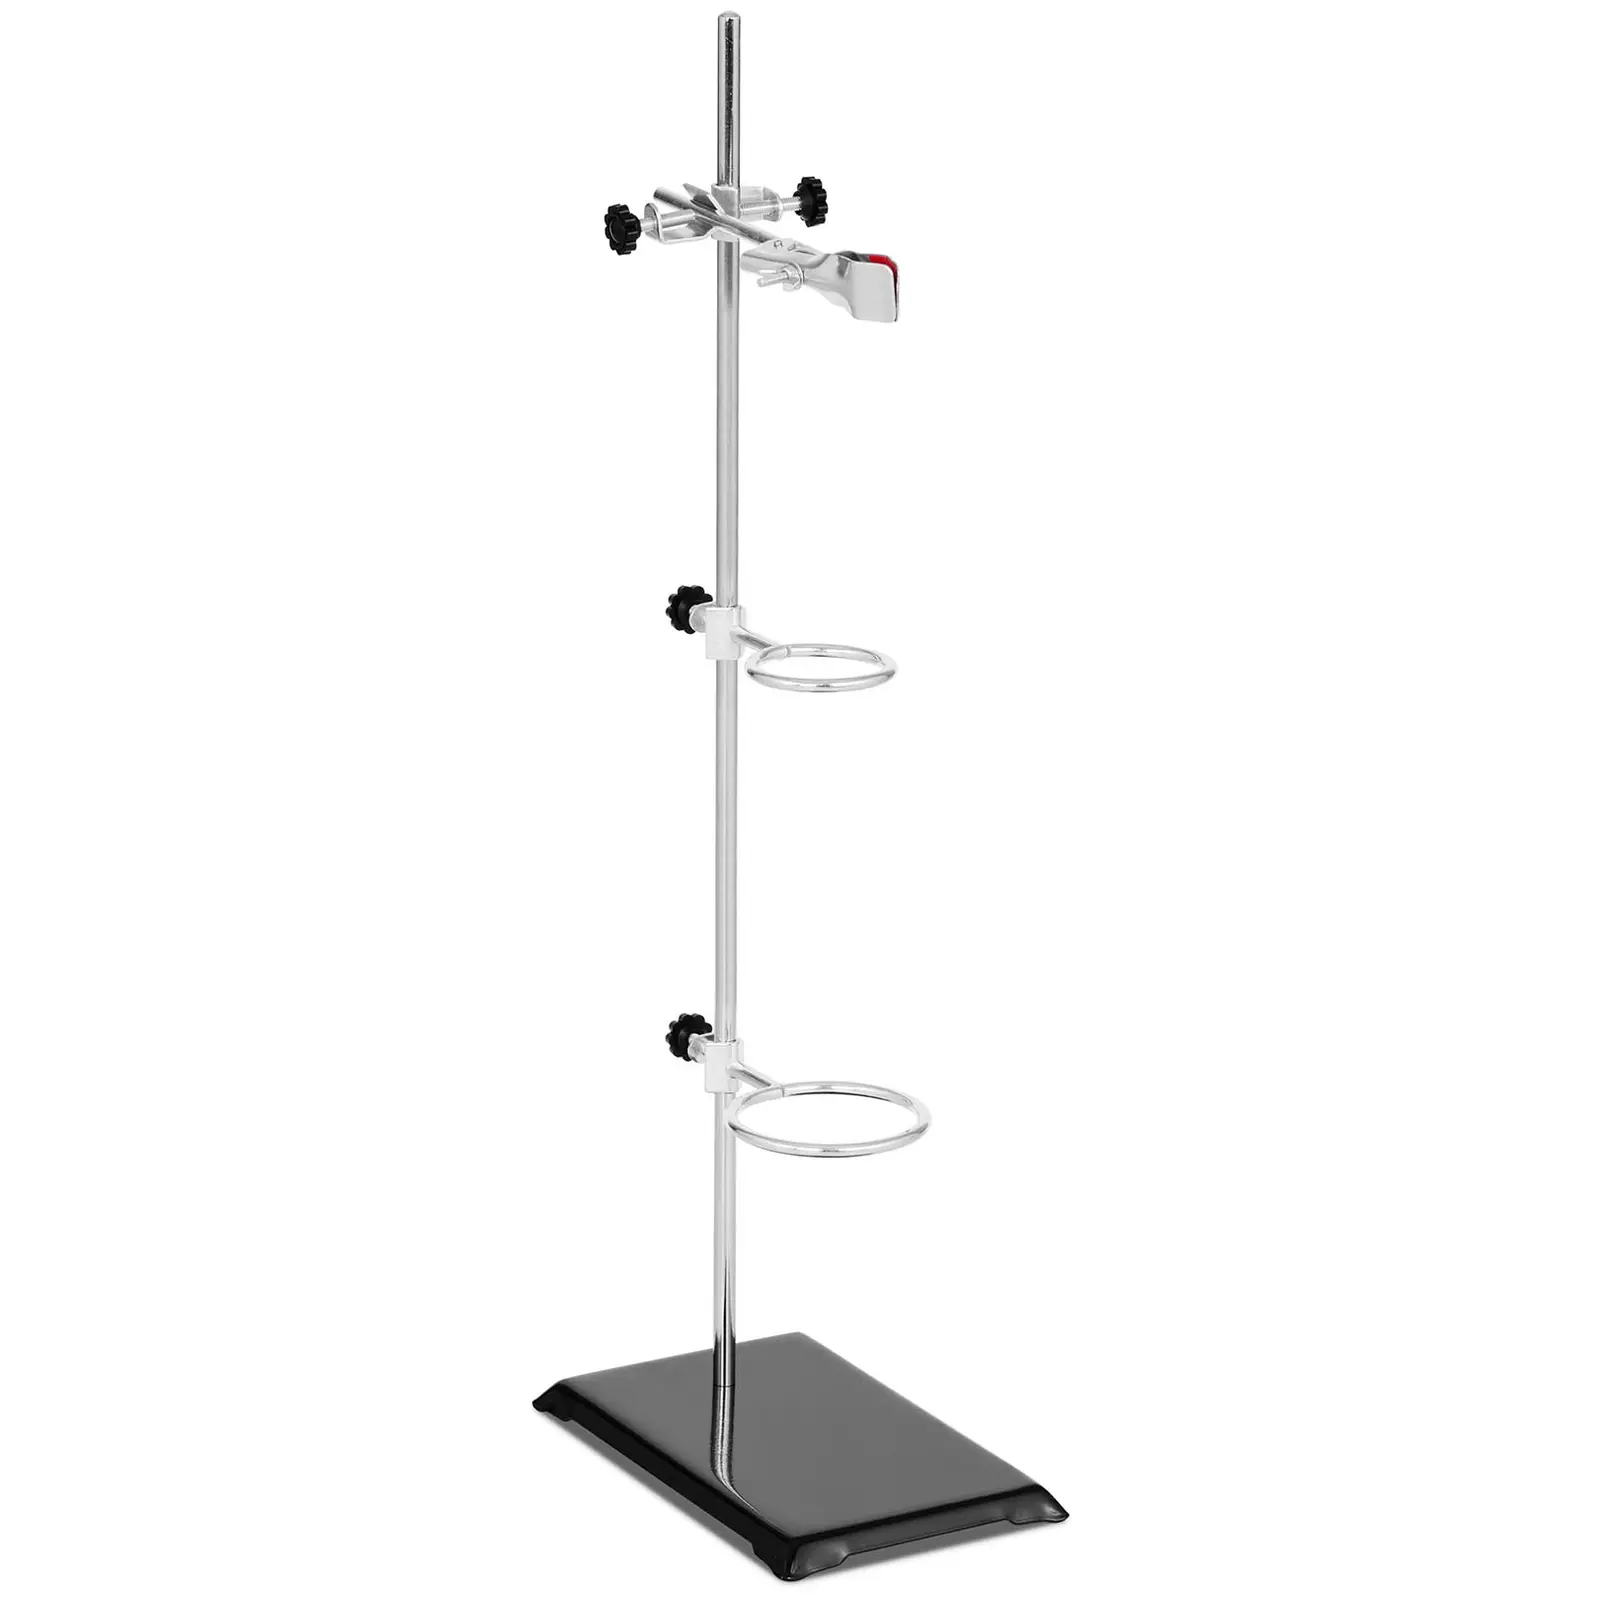 Laboratory Stand - with clamp, boss head and 2 rings